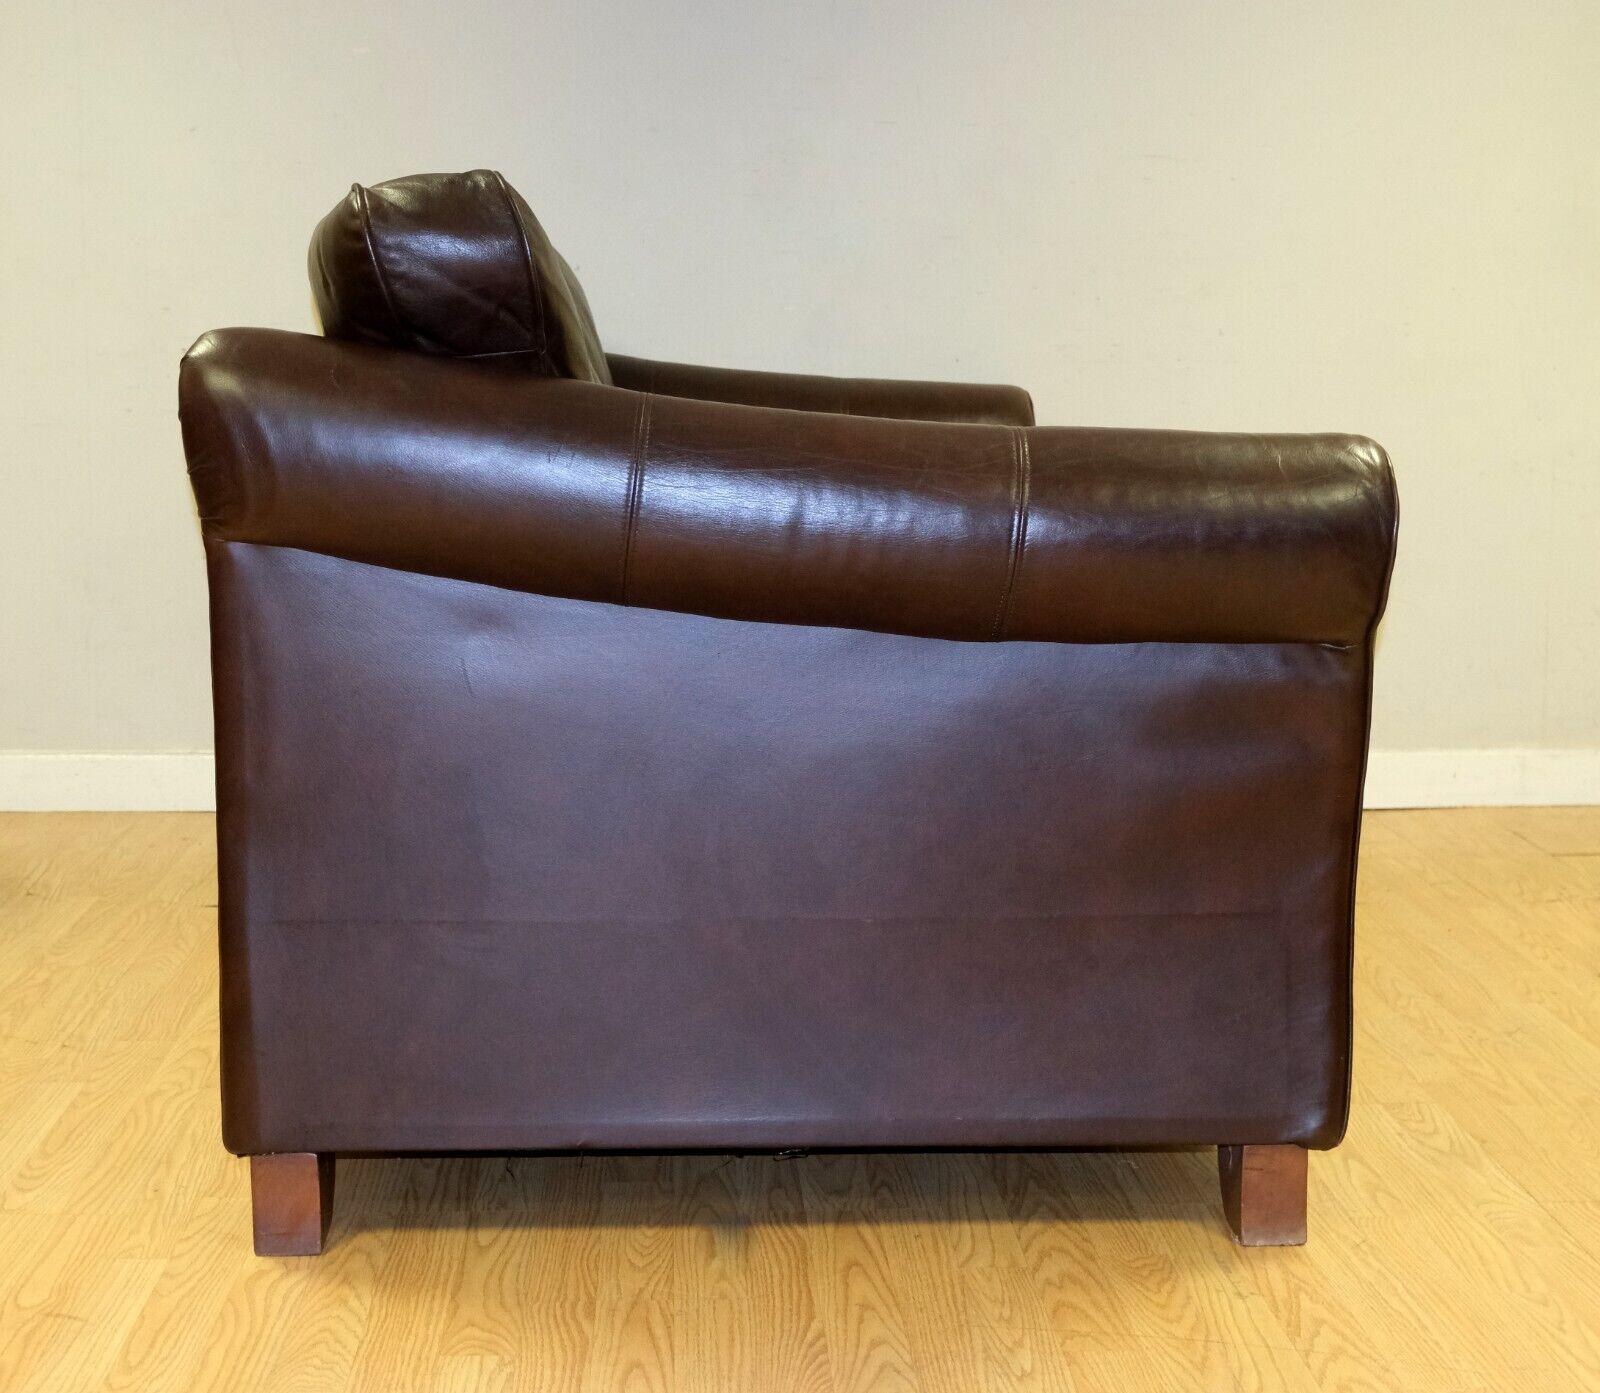 LOVELY MARKS & SPENCER ABBEY BRoWN LEATHER TWO SEATER SOFA ON WOODEN FEETs (Leder) im Angebot